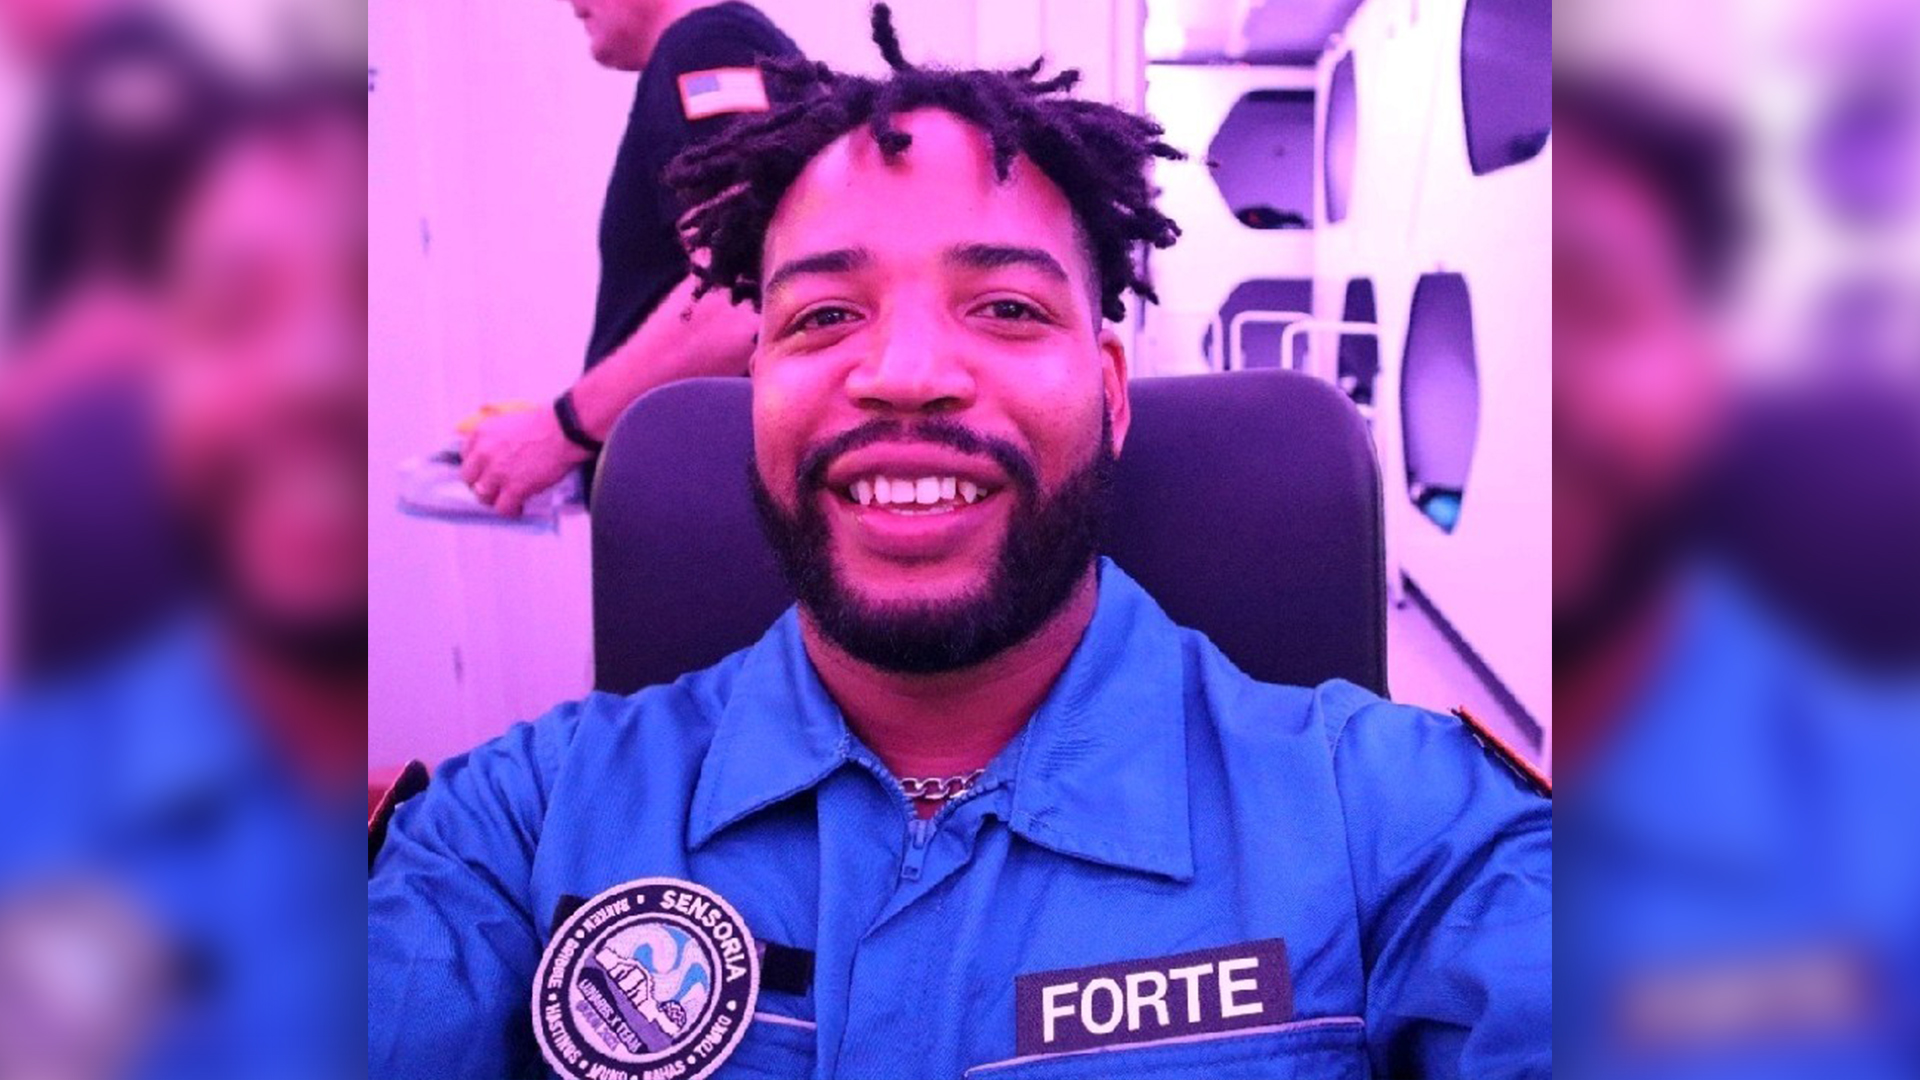 As An Artist And Astronaut Heading To Space, Jesse Forte's On A Mission To Inspire Black Boys And Girls